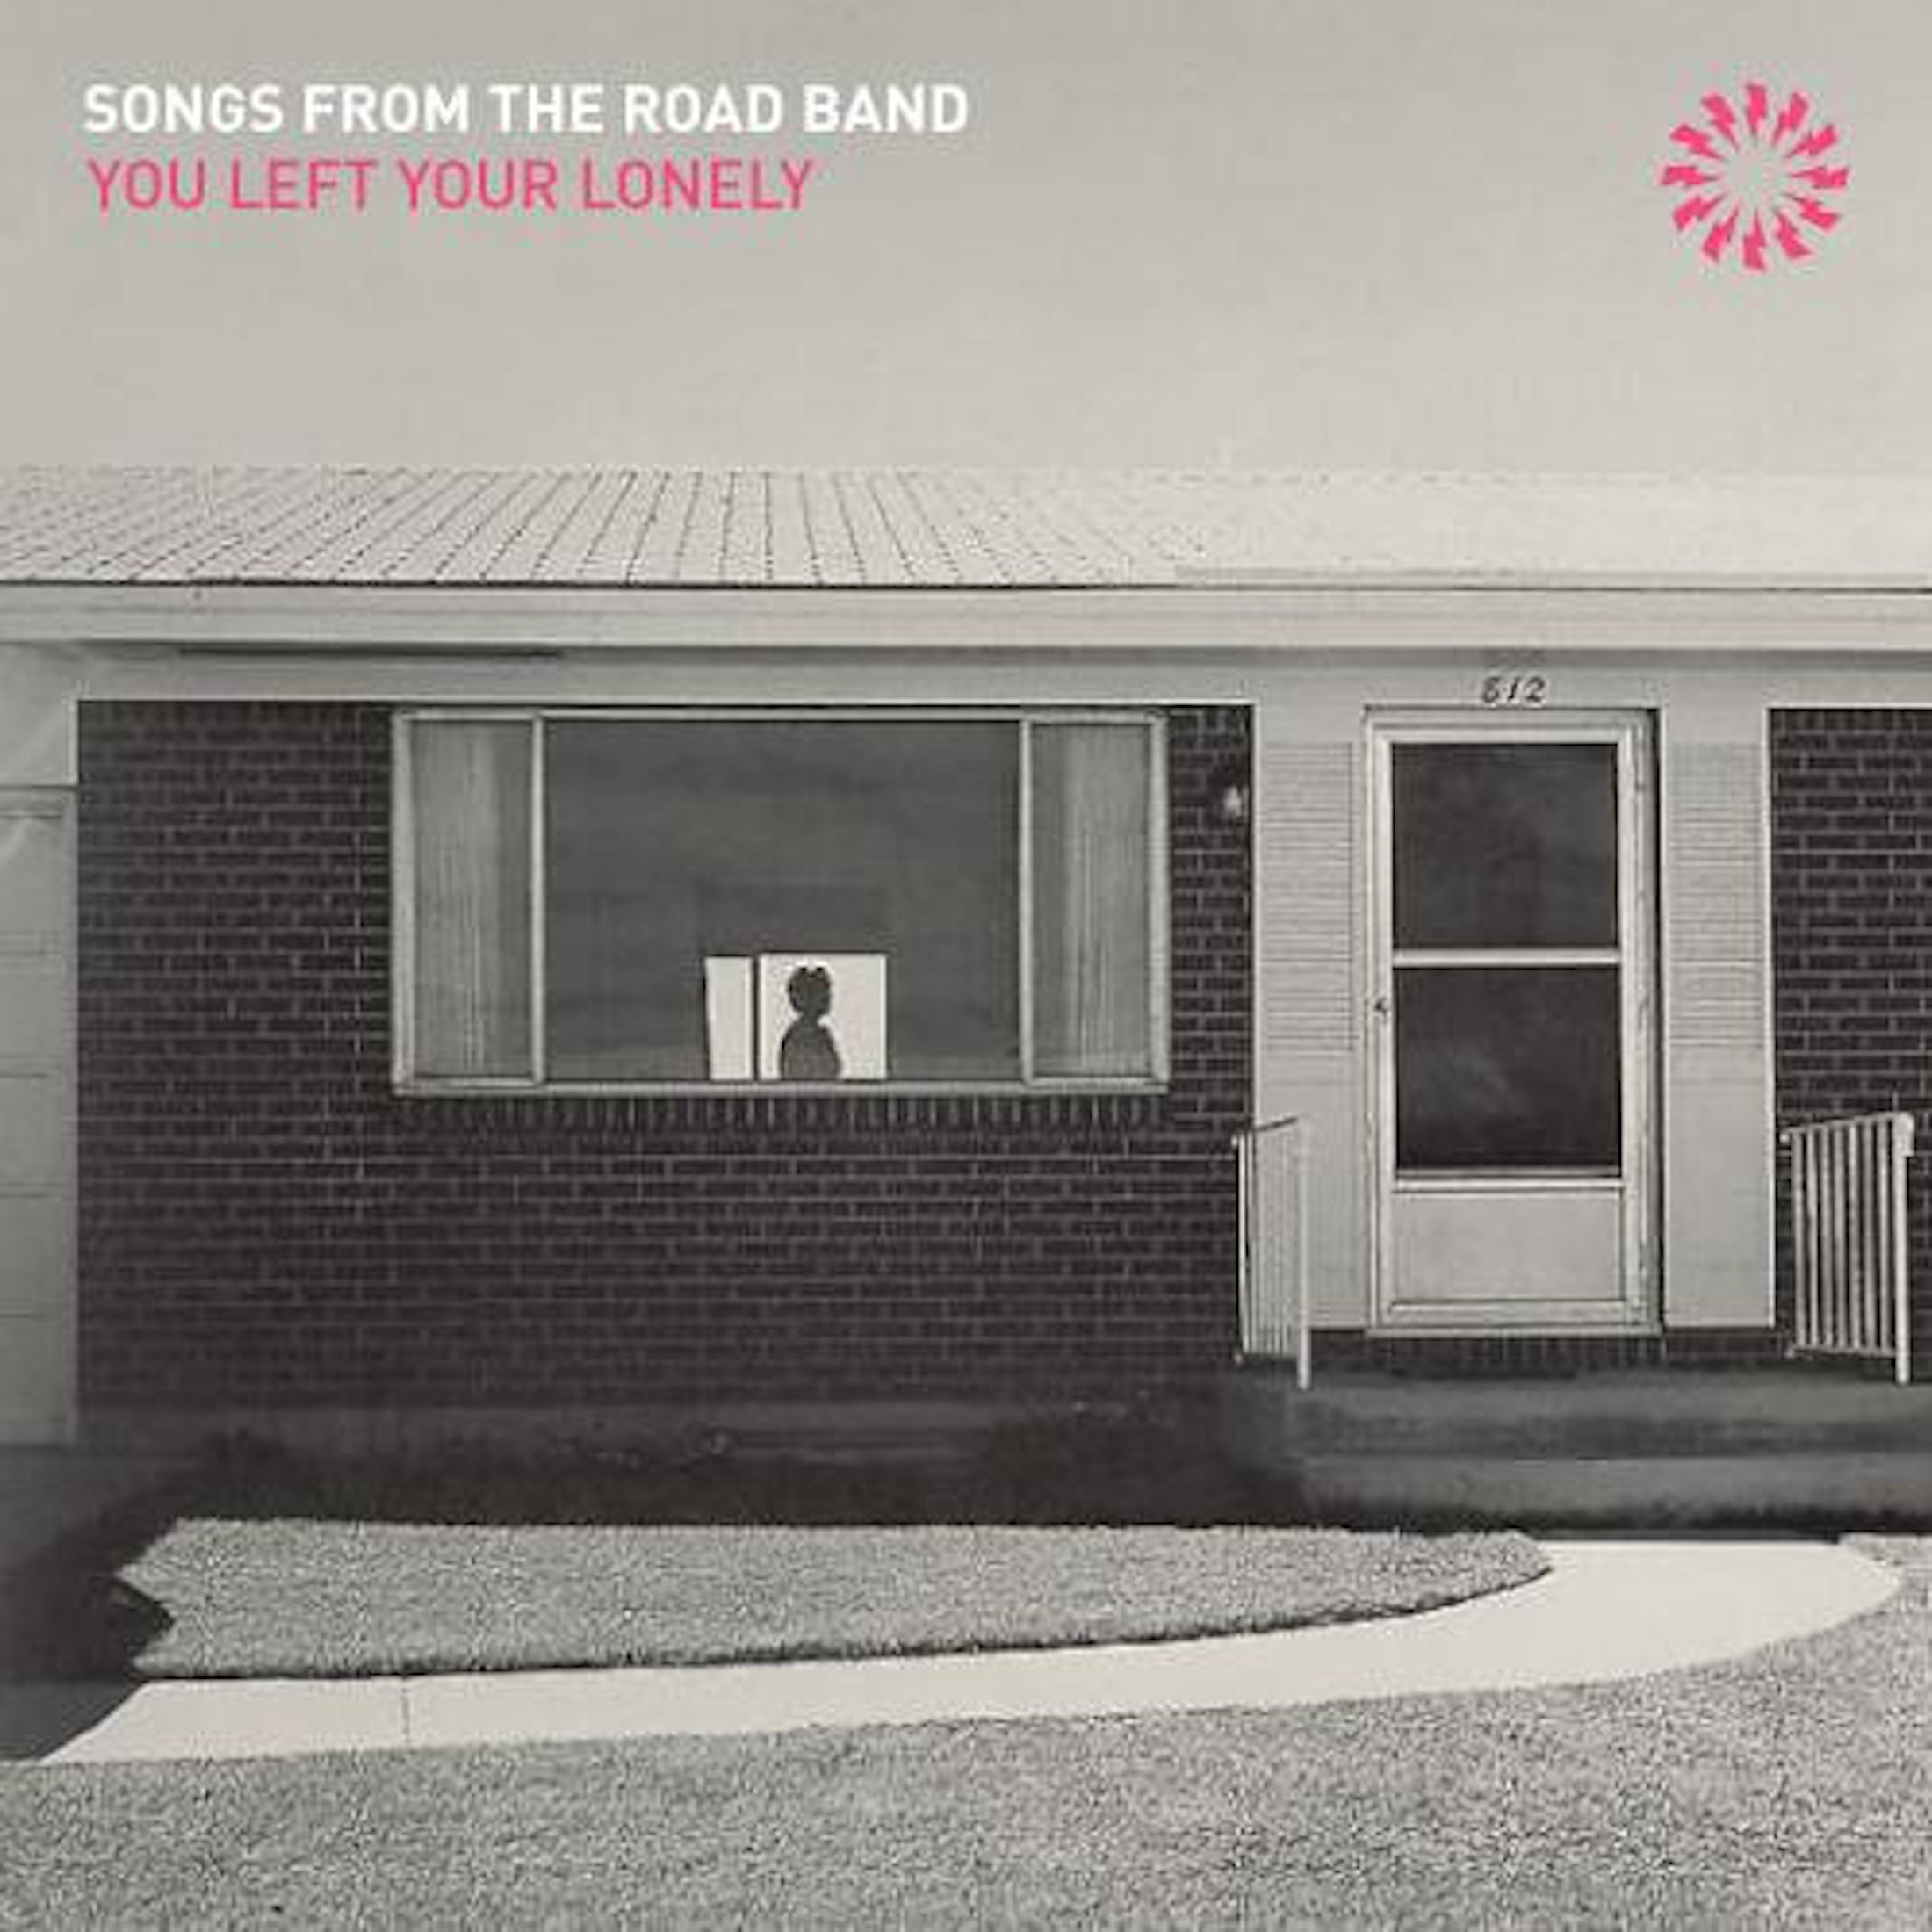 Songs From the Road Band Releases New Single 'You Left Your Lonely'